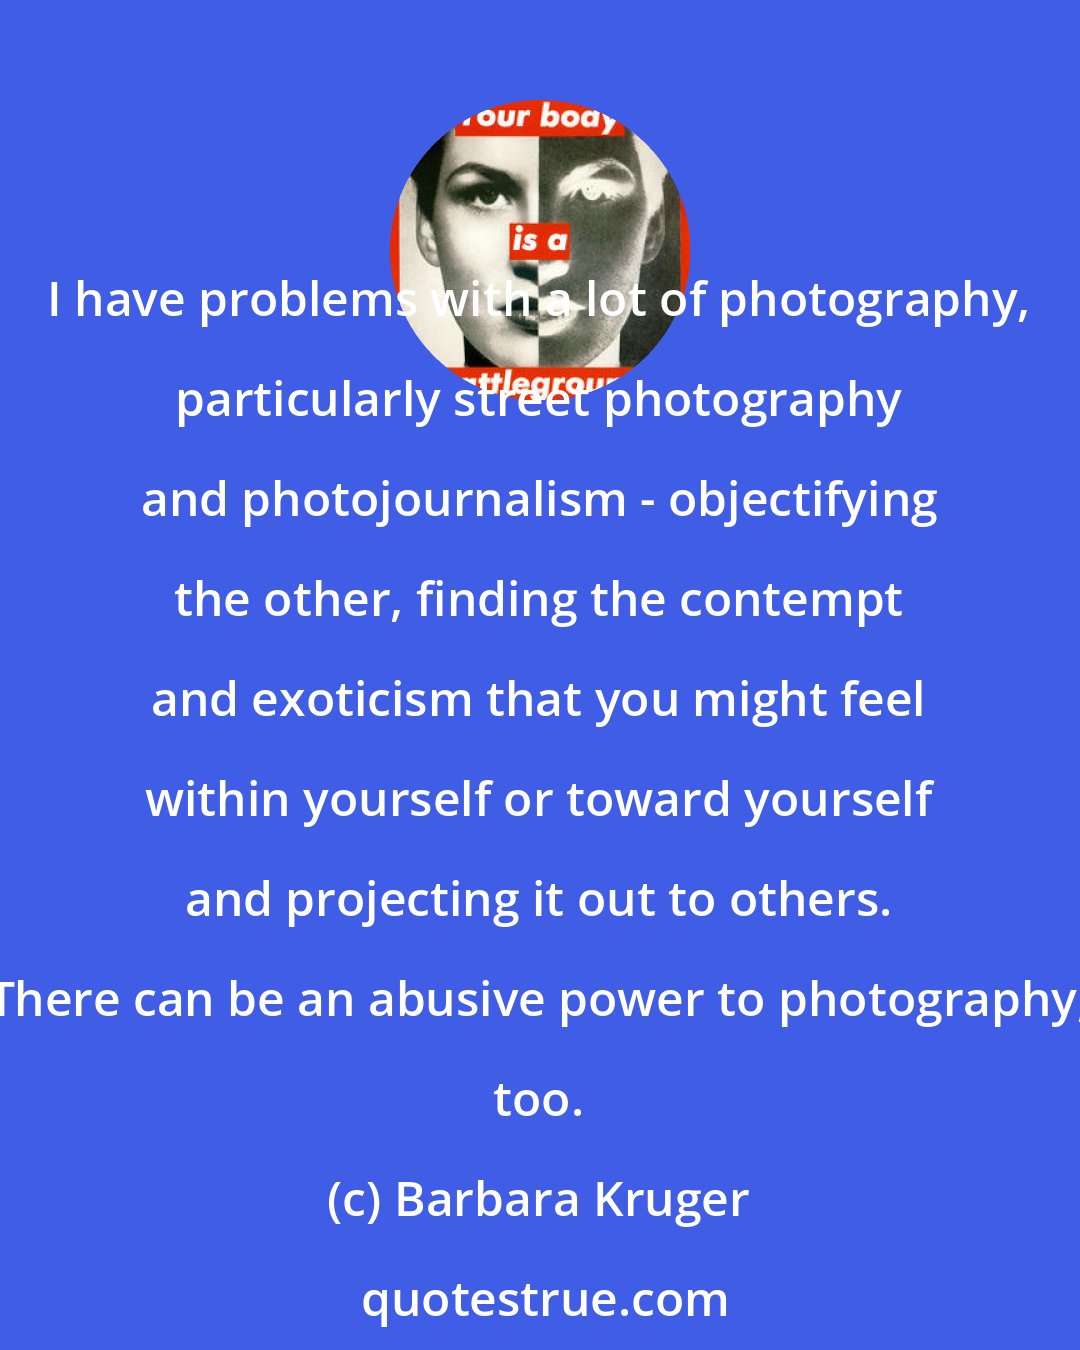 Barbara Kruger: I have problems with a lot of photography, particularly street photography and photojournalism - objectifying the other, finding the contempt and exoticism that you might feel within yourself or toward yourself and projecting it out to others. There can be an abusive power to photography, too.